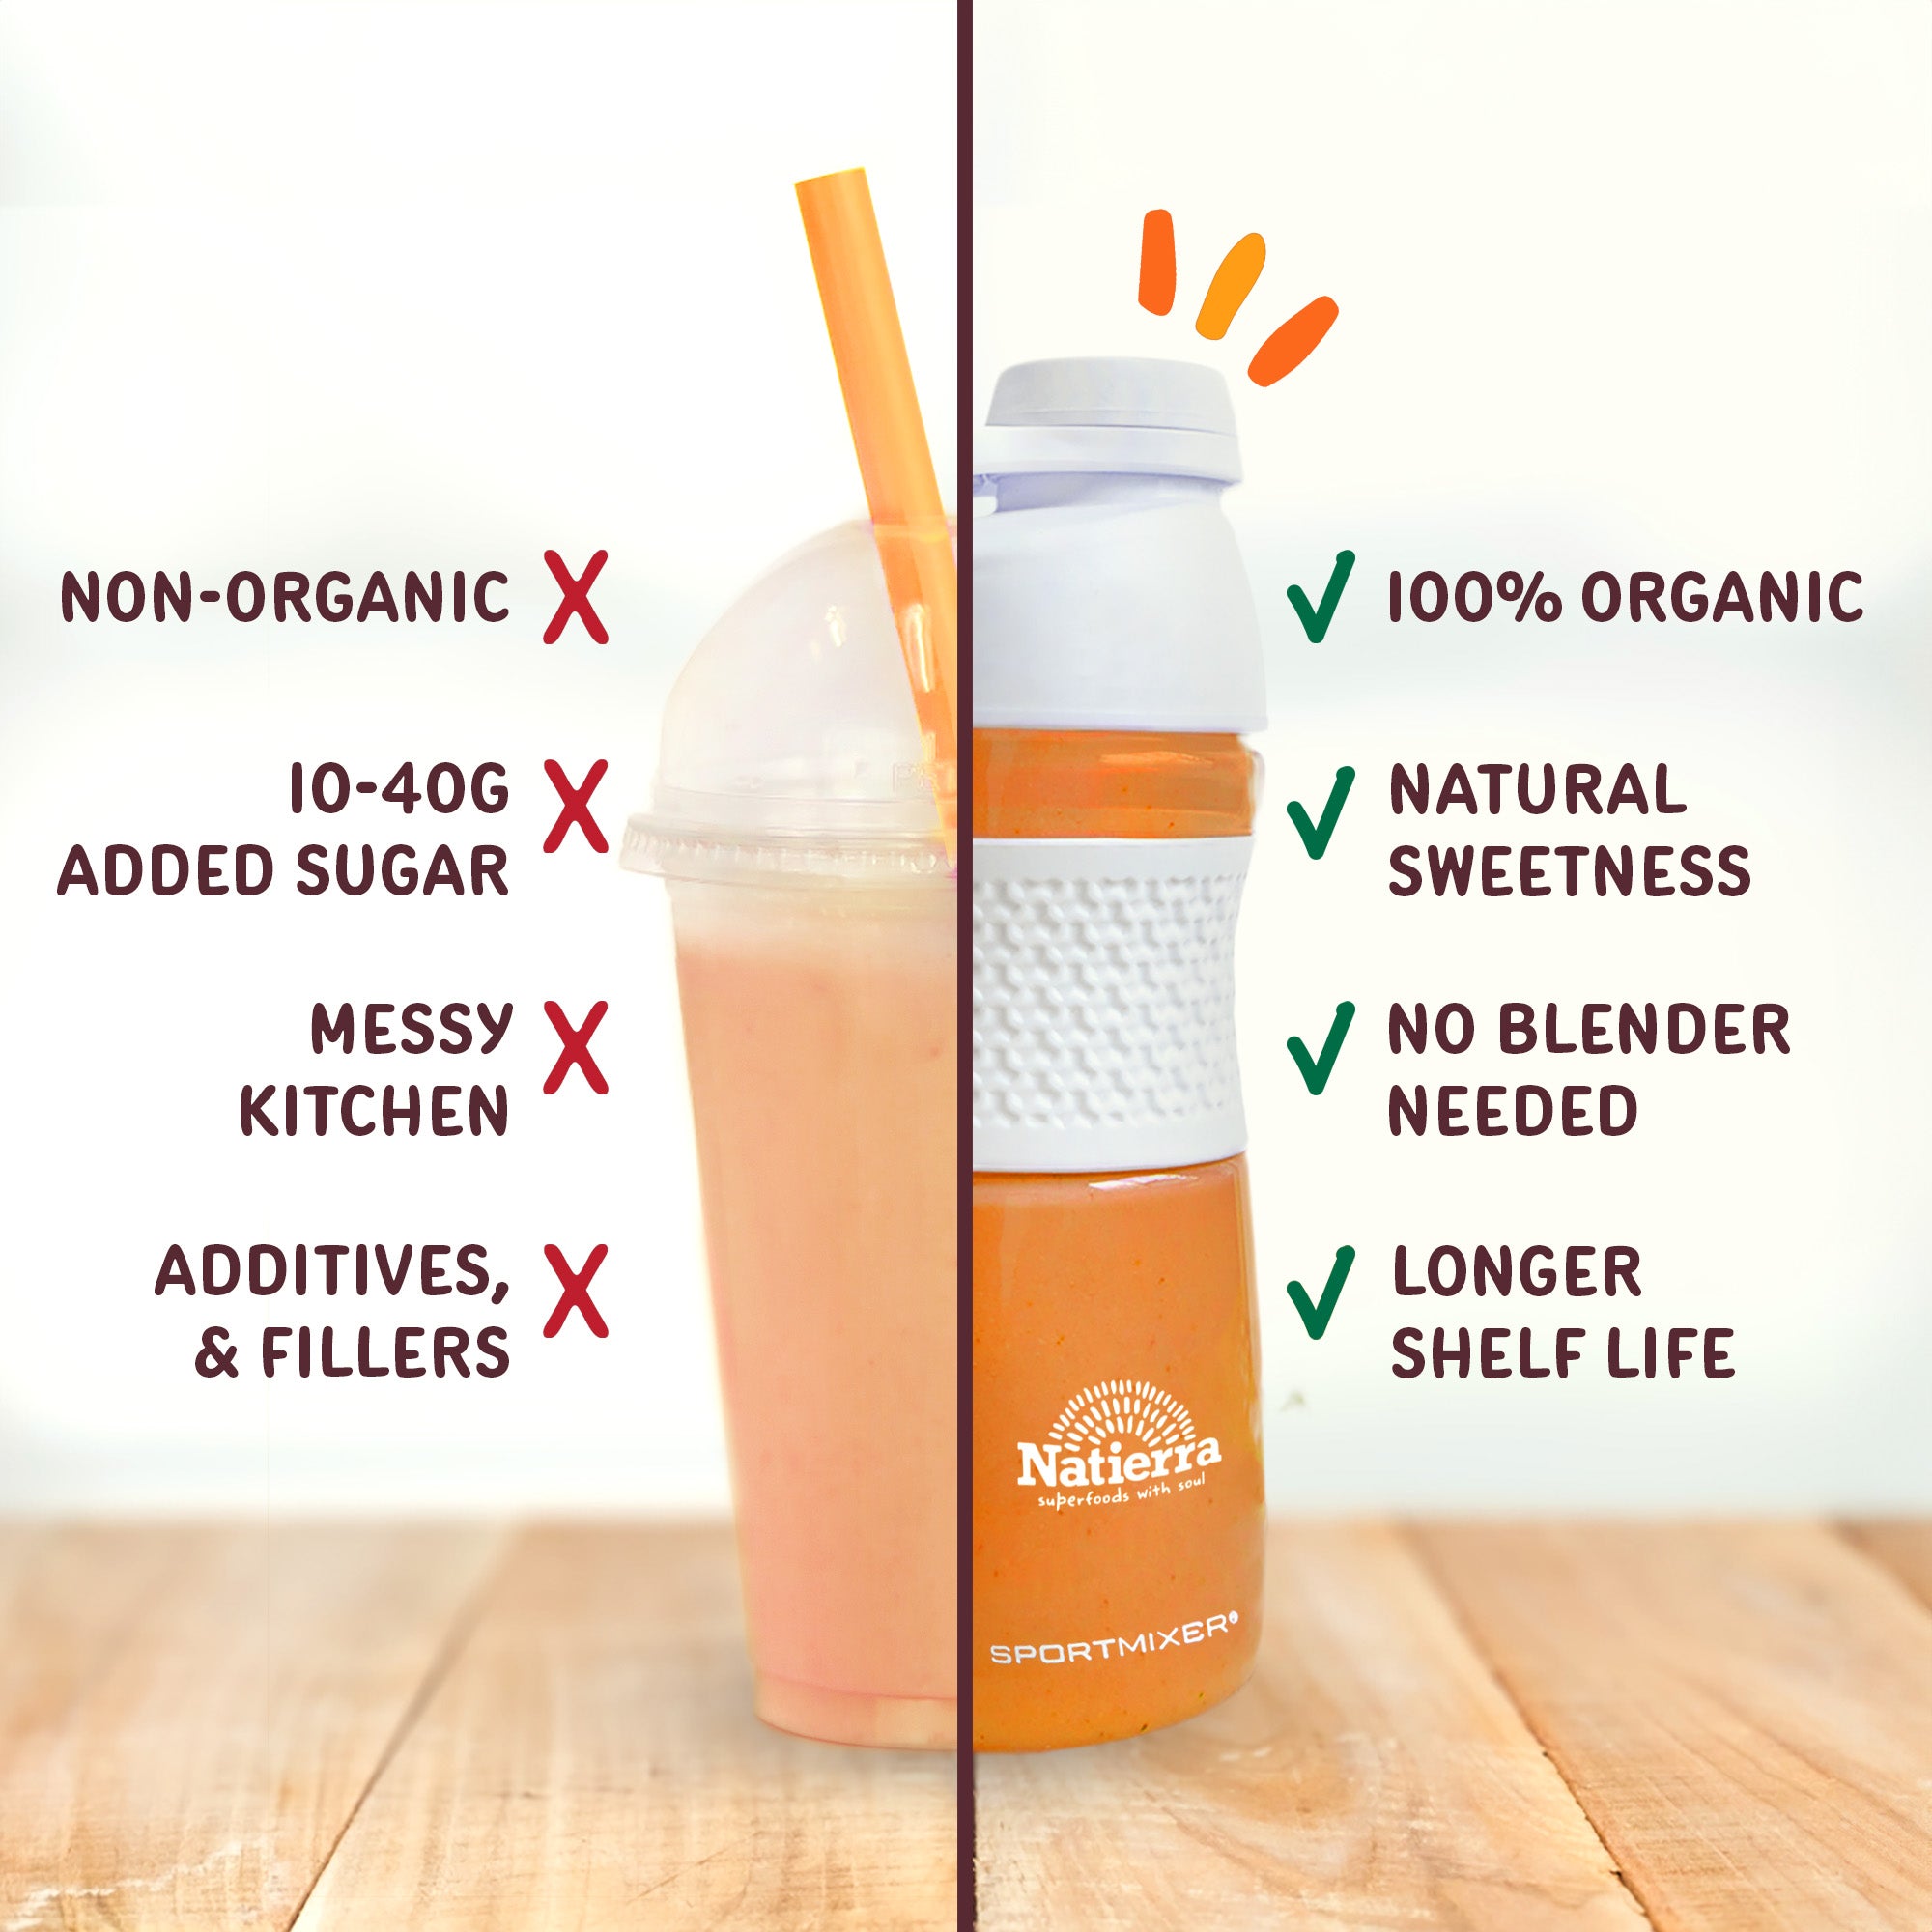 What makes Natierra's organic smoothies different?